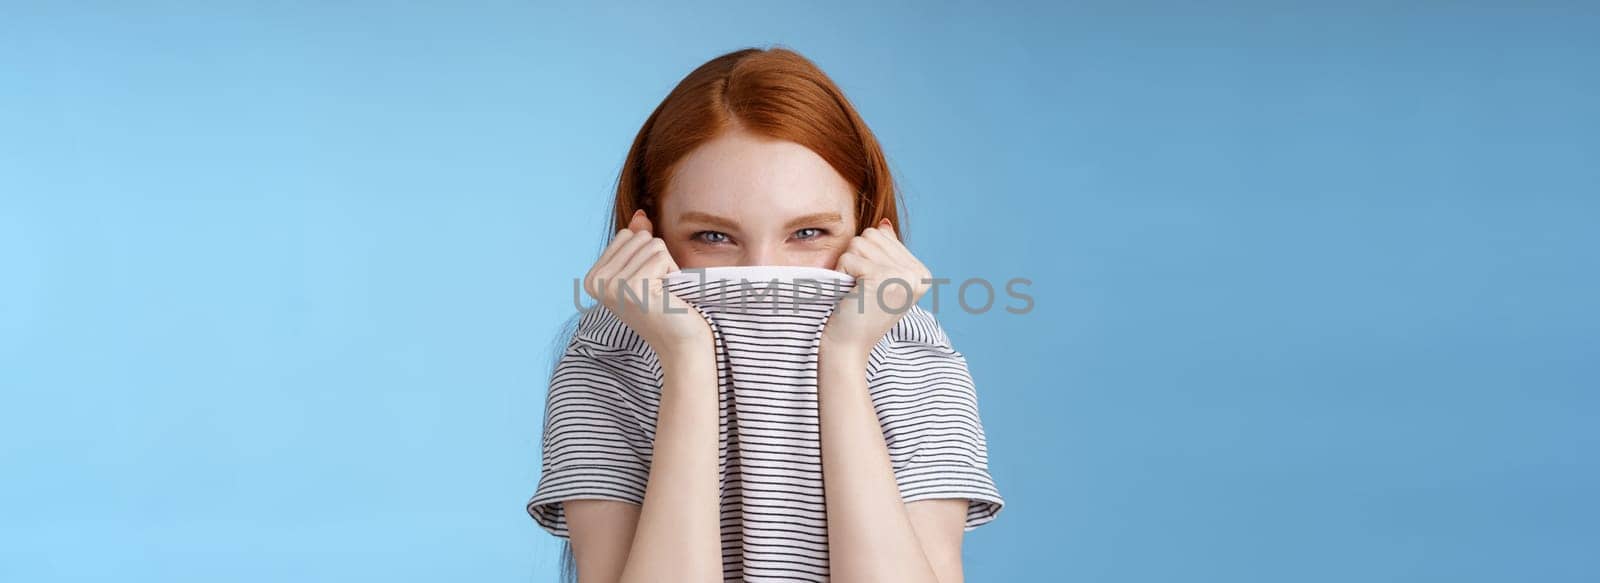 Silly flirty amused attractive playful redhead girlfriend hiding face pulling t-shirt head squinting devious mysteriously giggle laughing hope disguise pranking friend standing blue background.